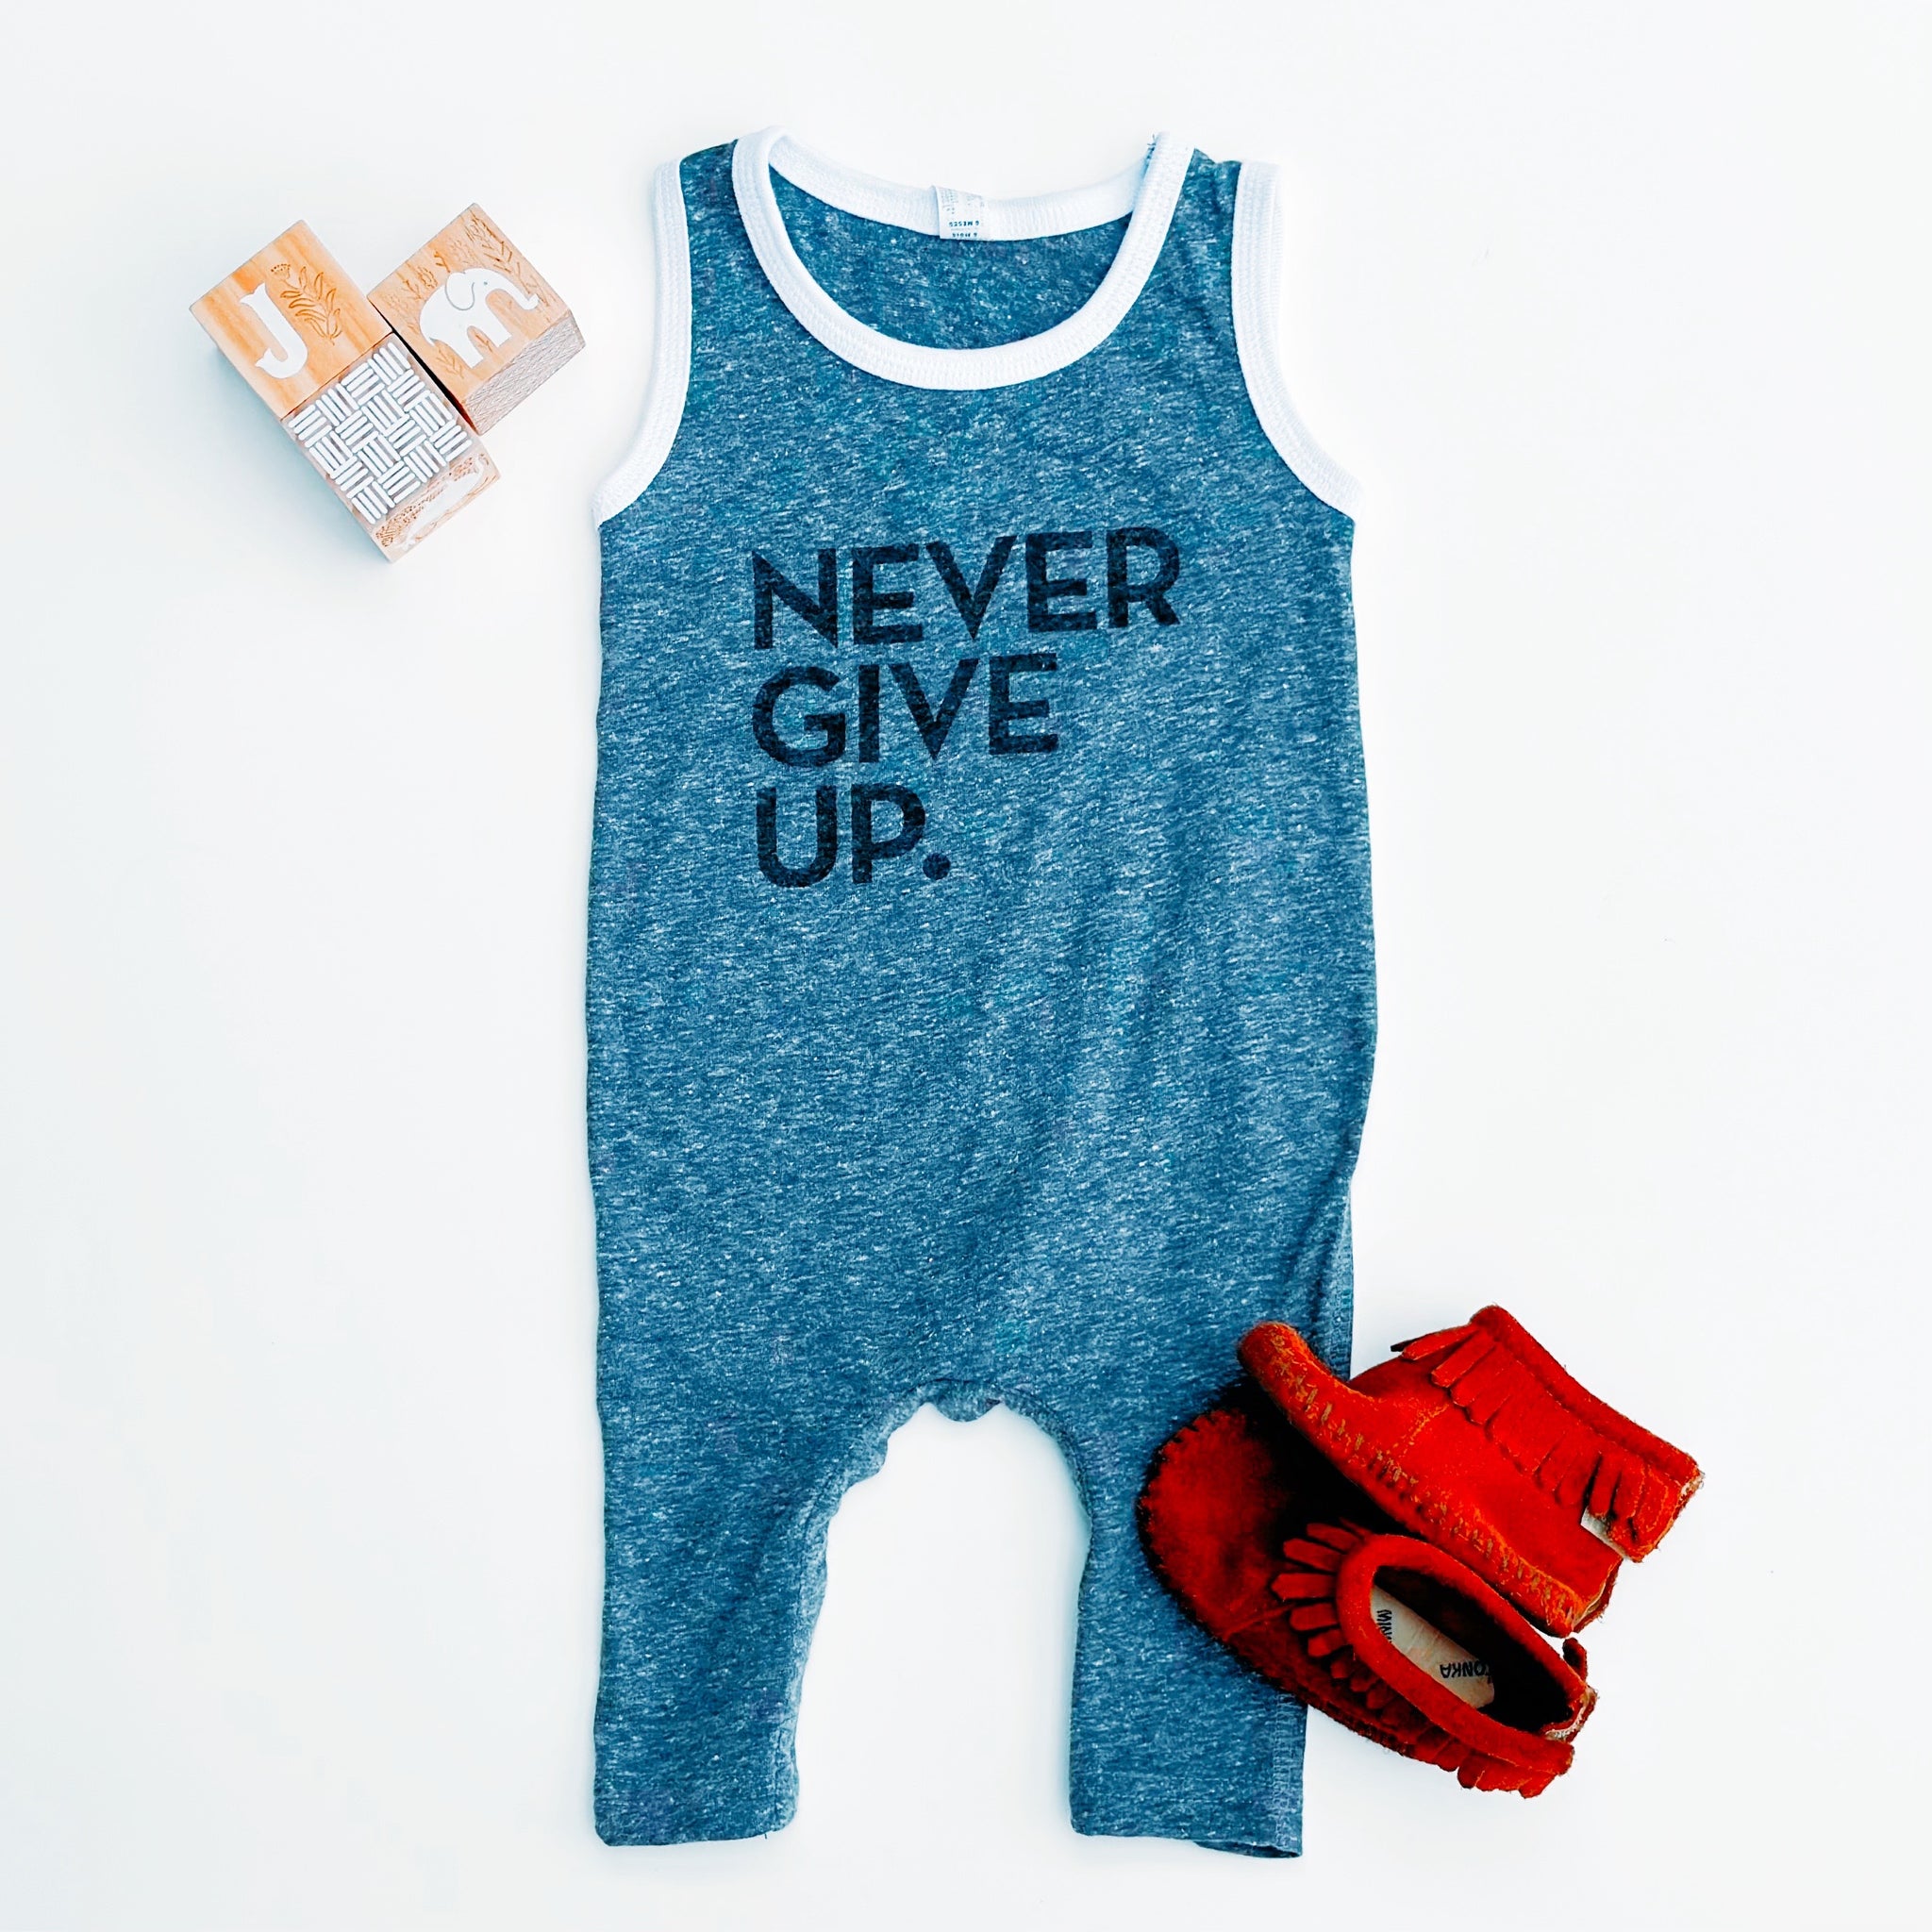 NEVER GIVE UP. ROMPER